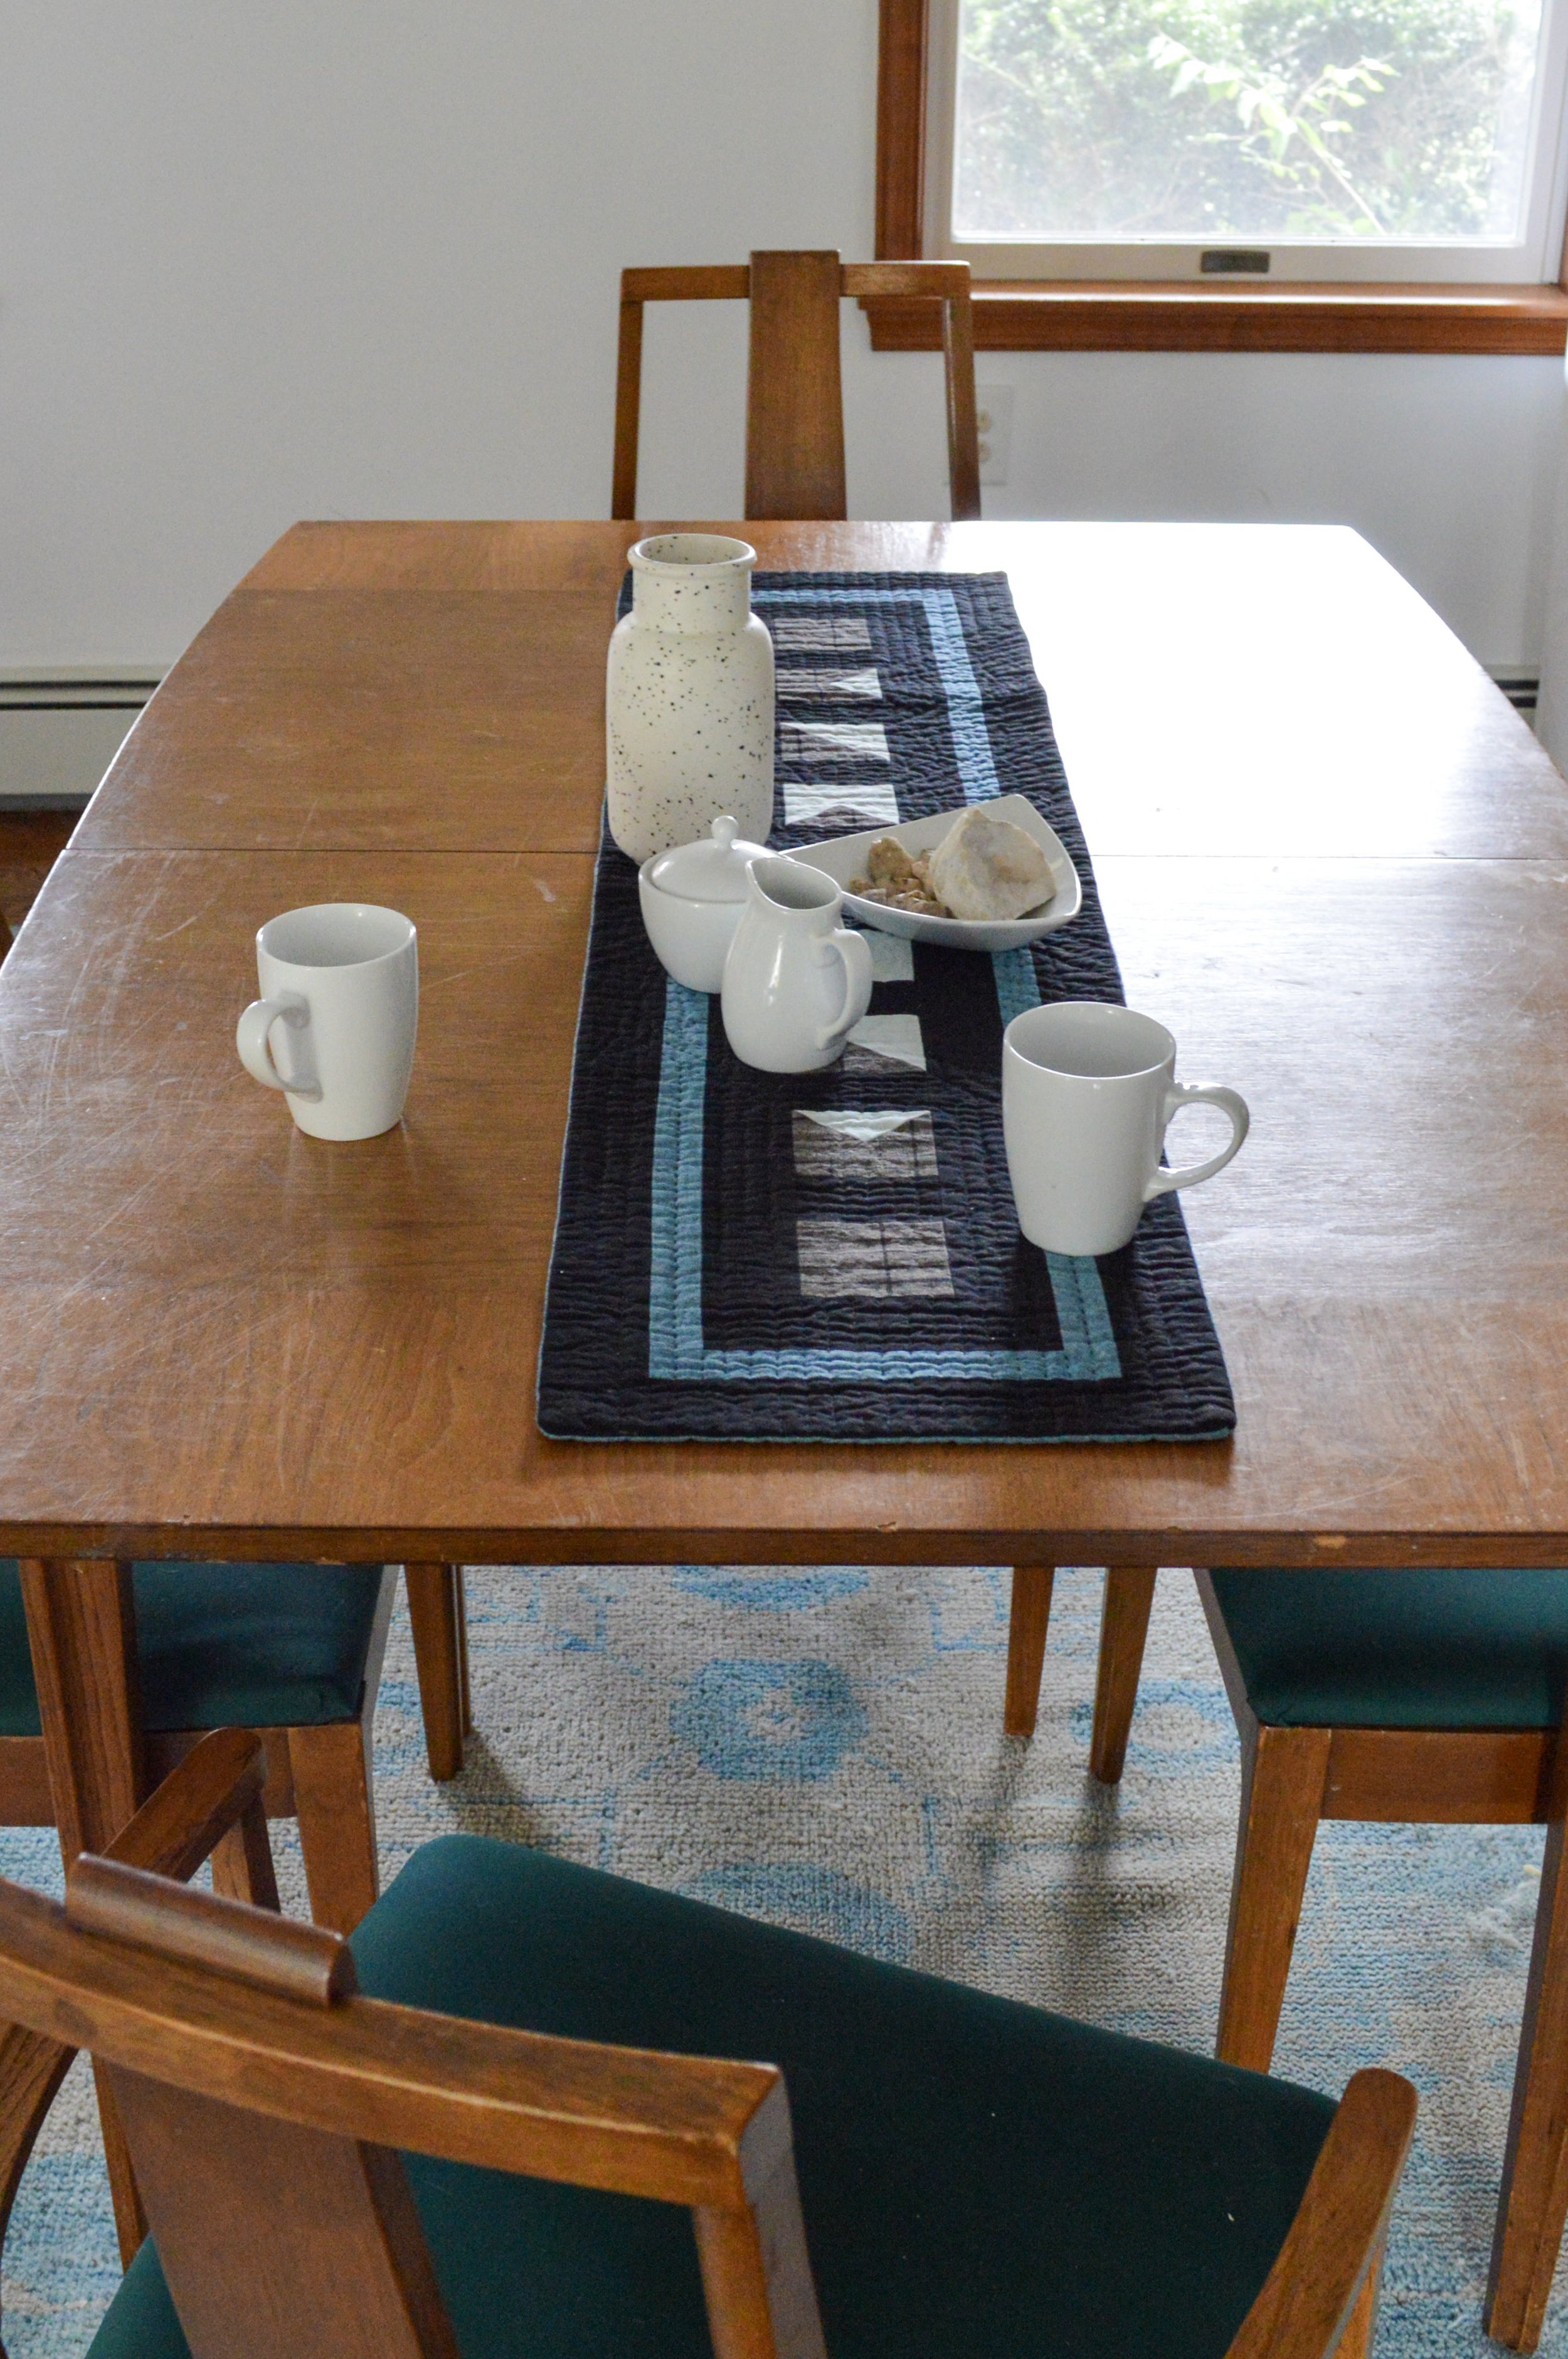  table with setting for tea with a black, quilted, table runner 